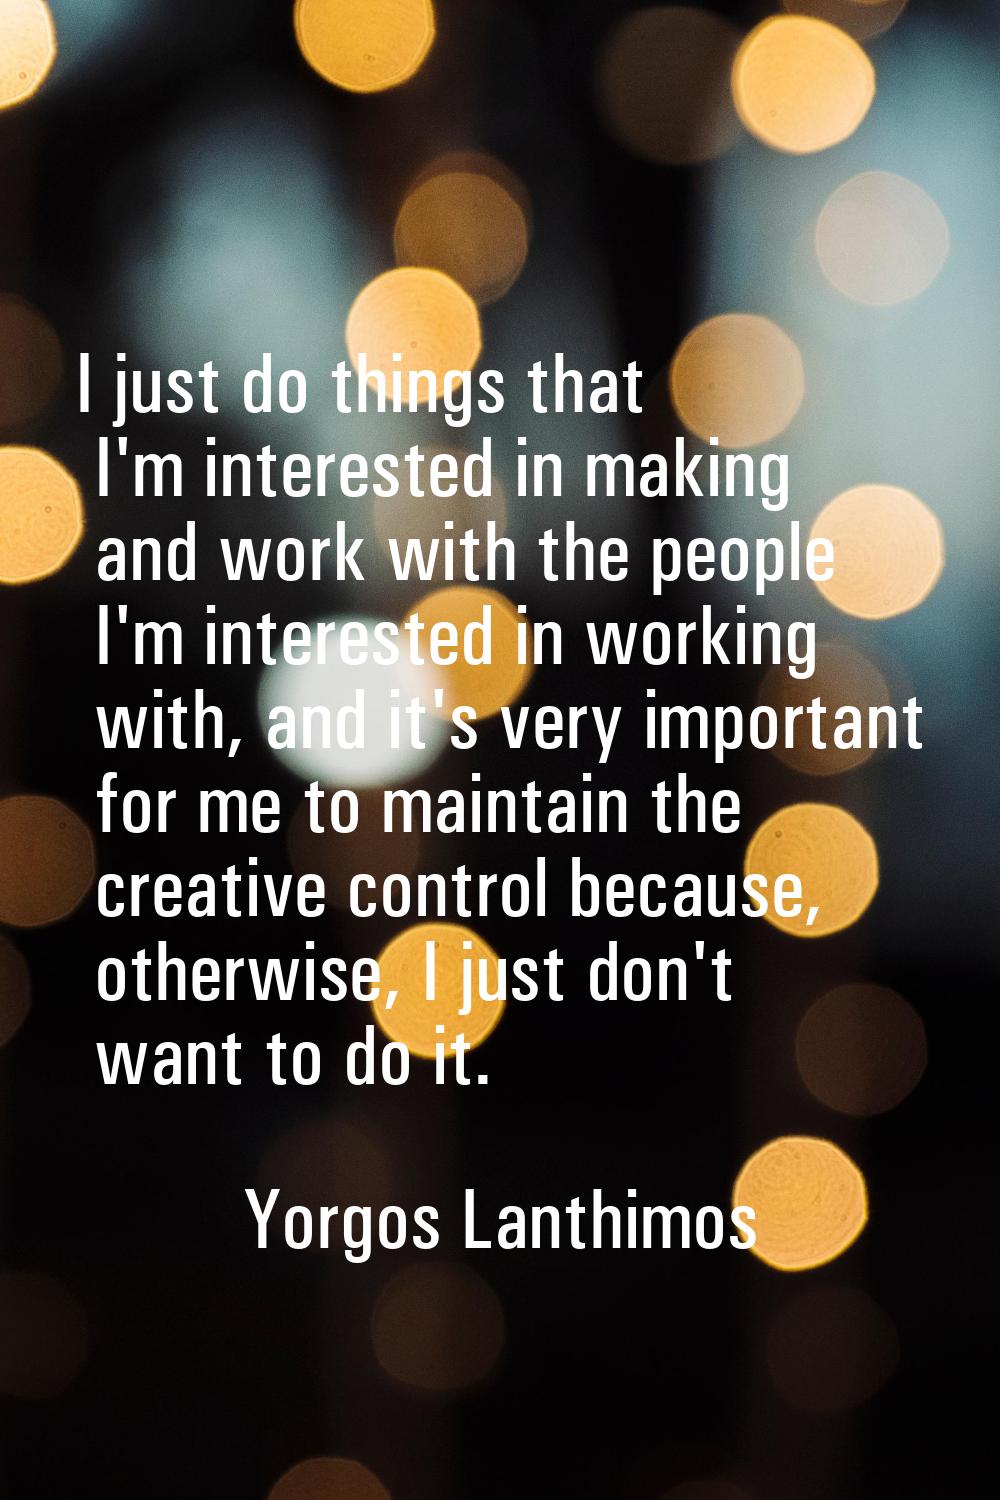 I just do things that I'm interested in making and work with the people I'm interested in working w